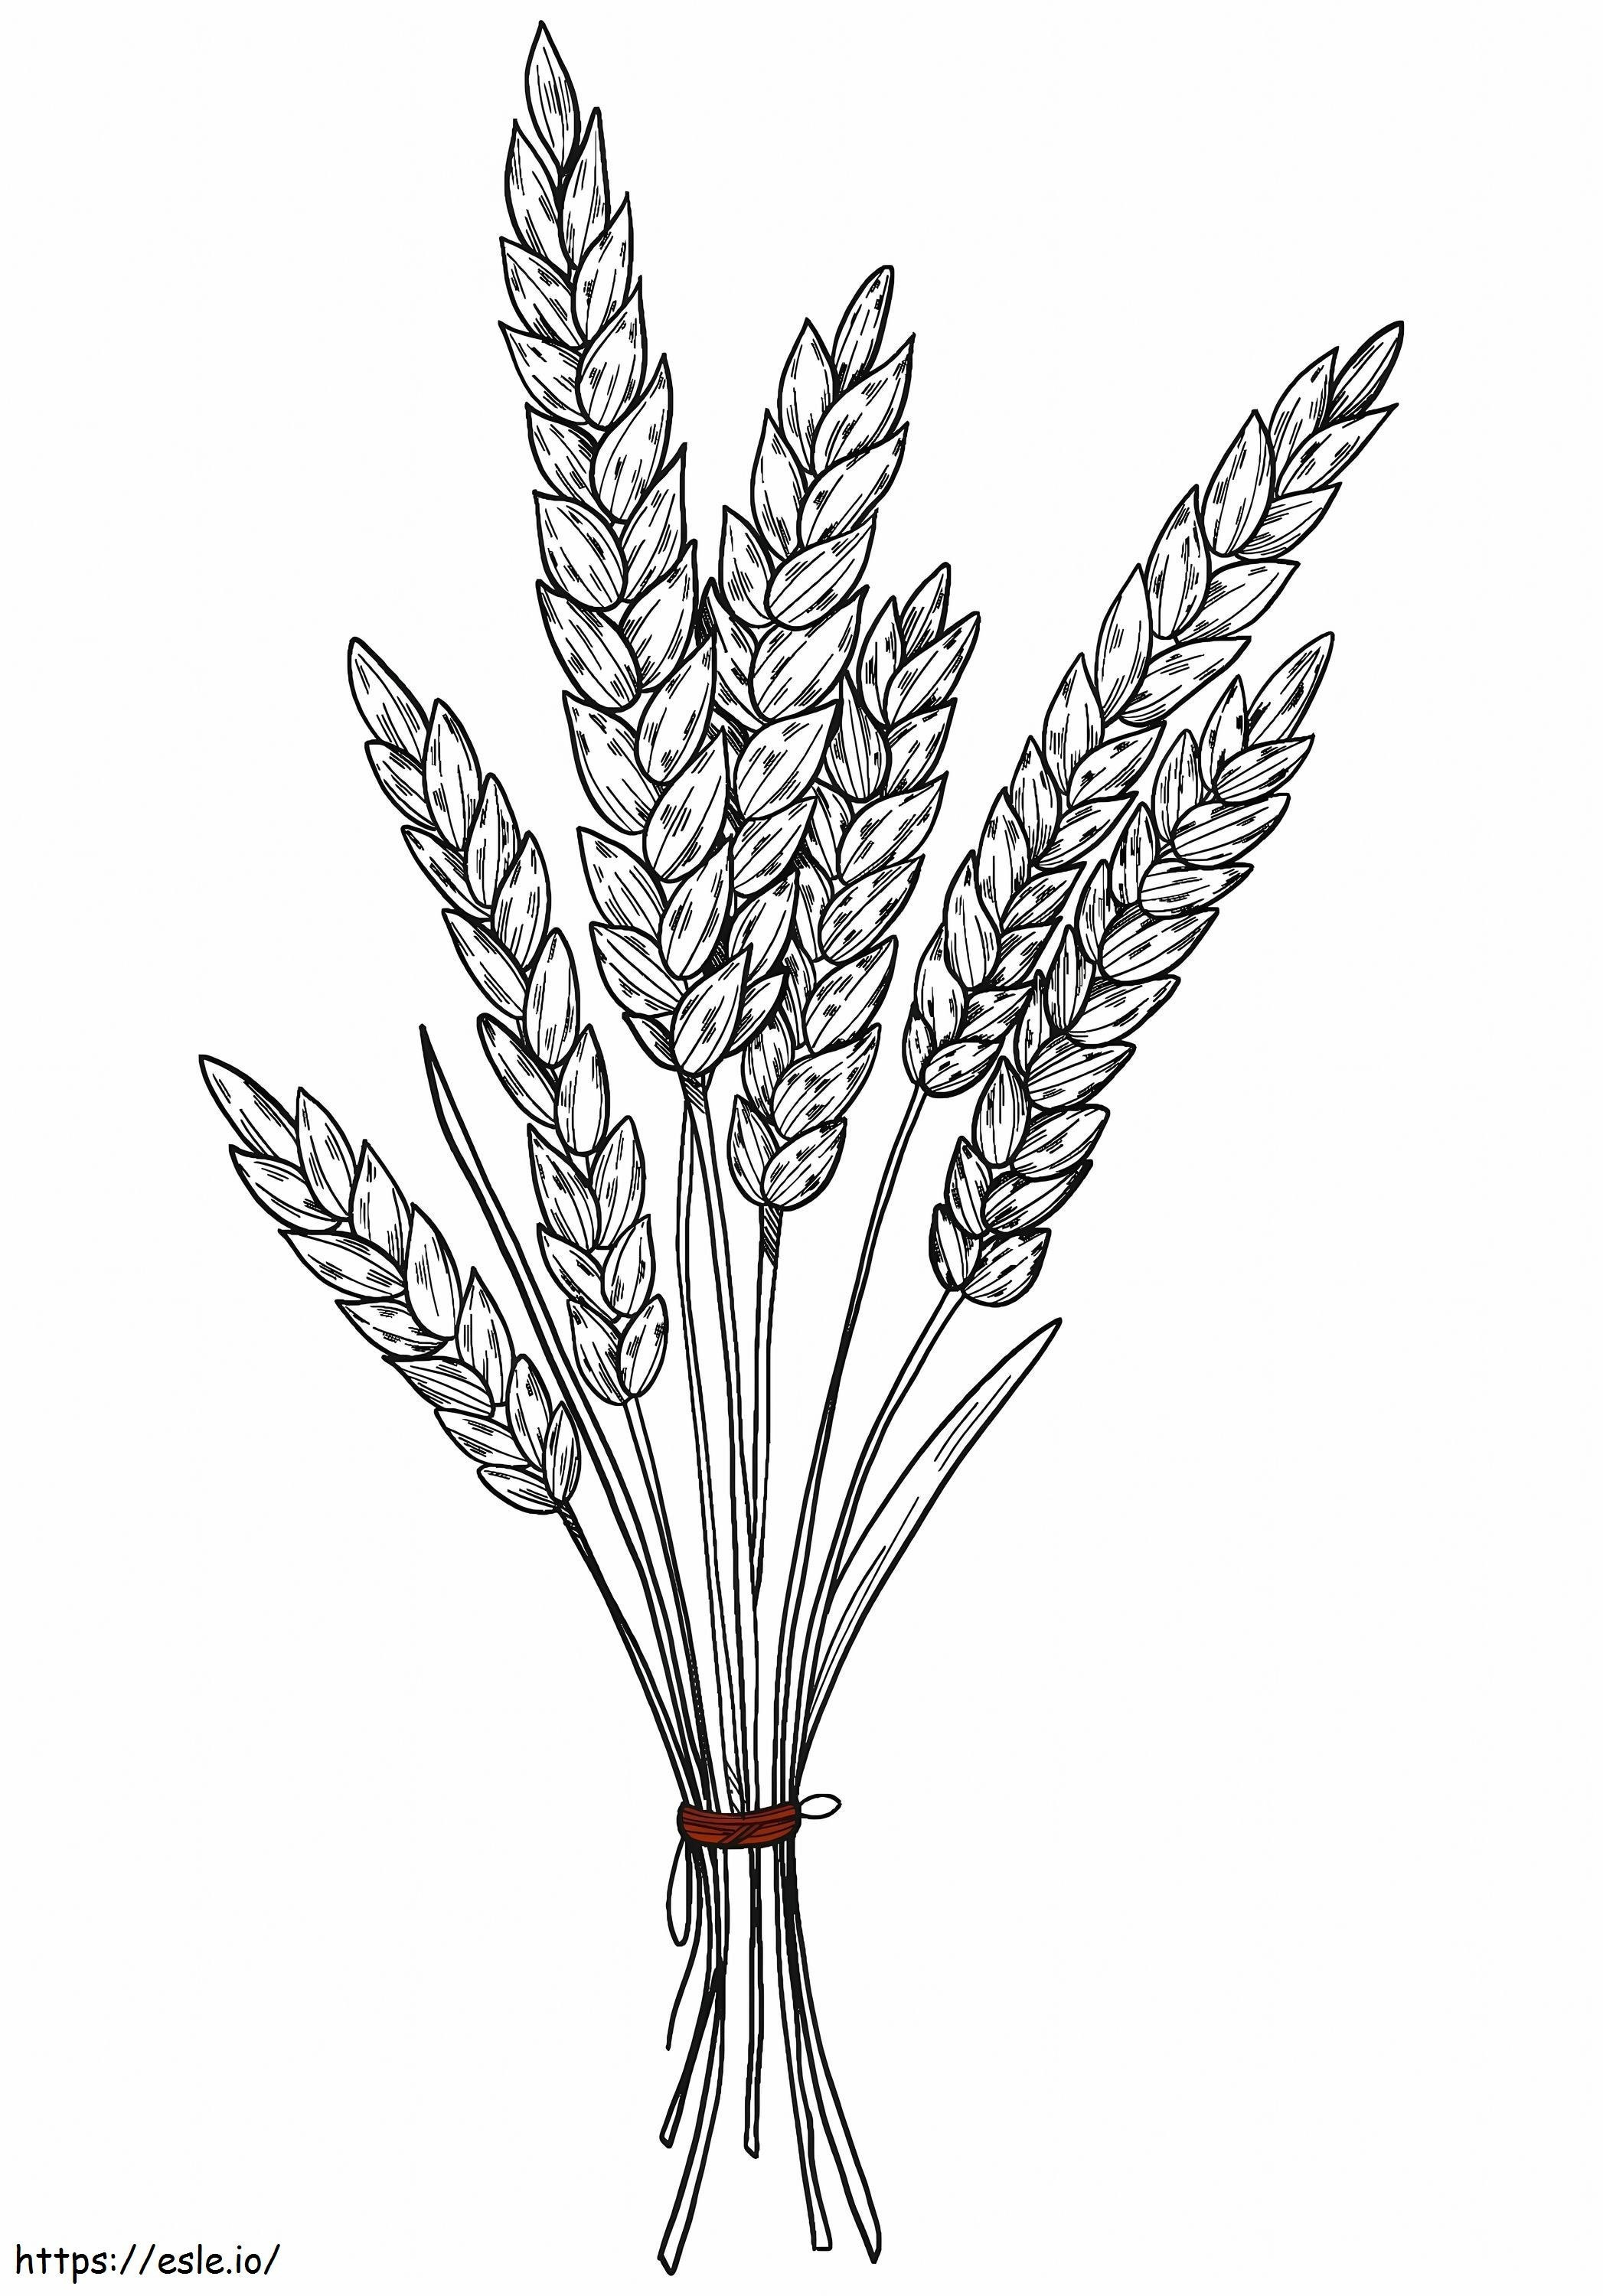 Awesome Wheat coloring page